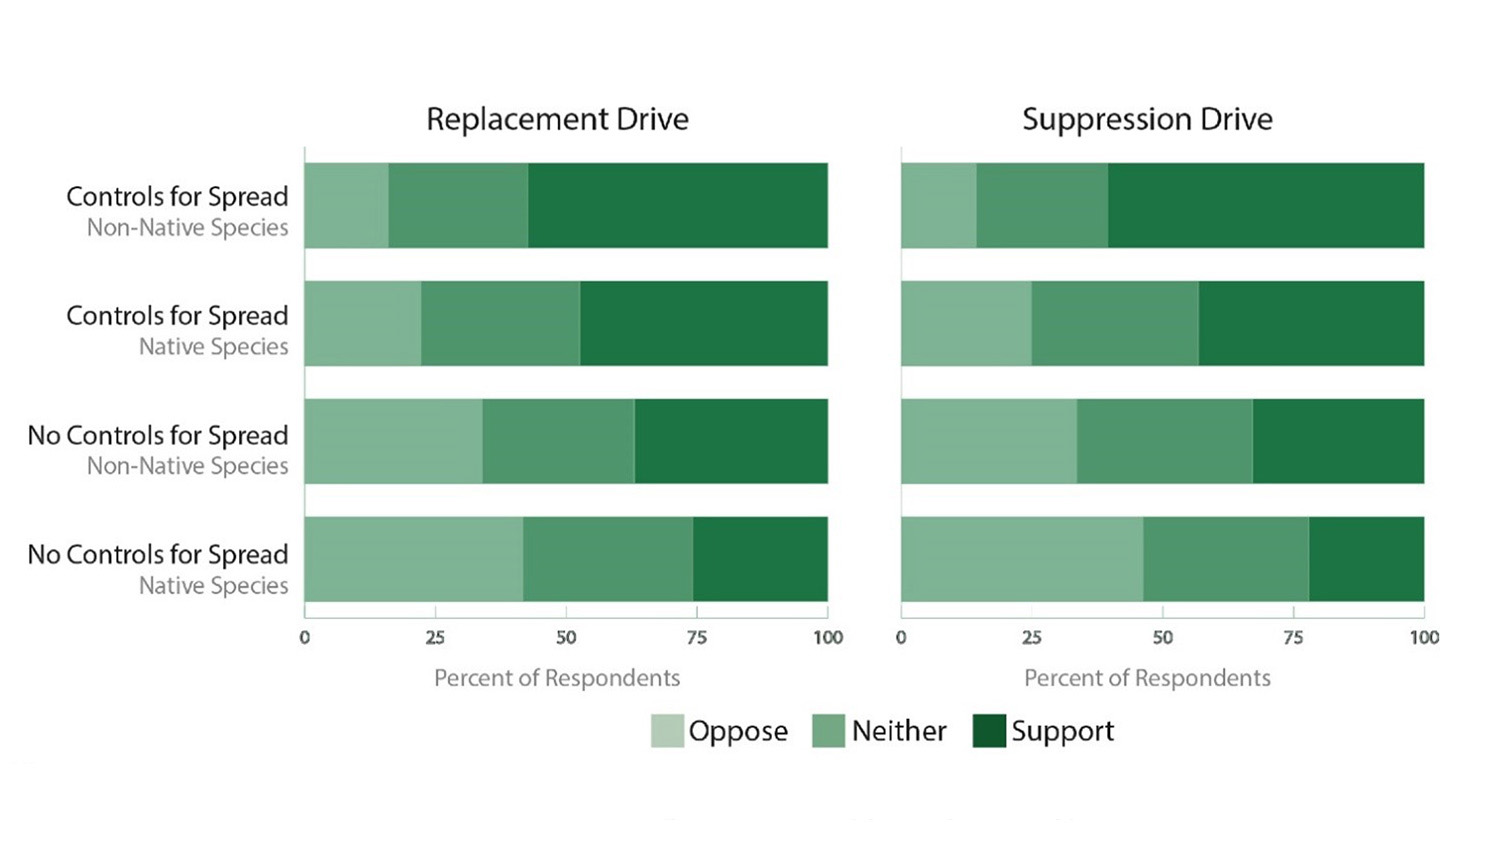 Results from consumer survey of using gene drives in agriculture.